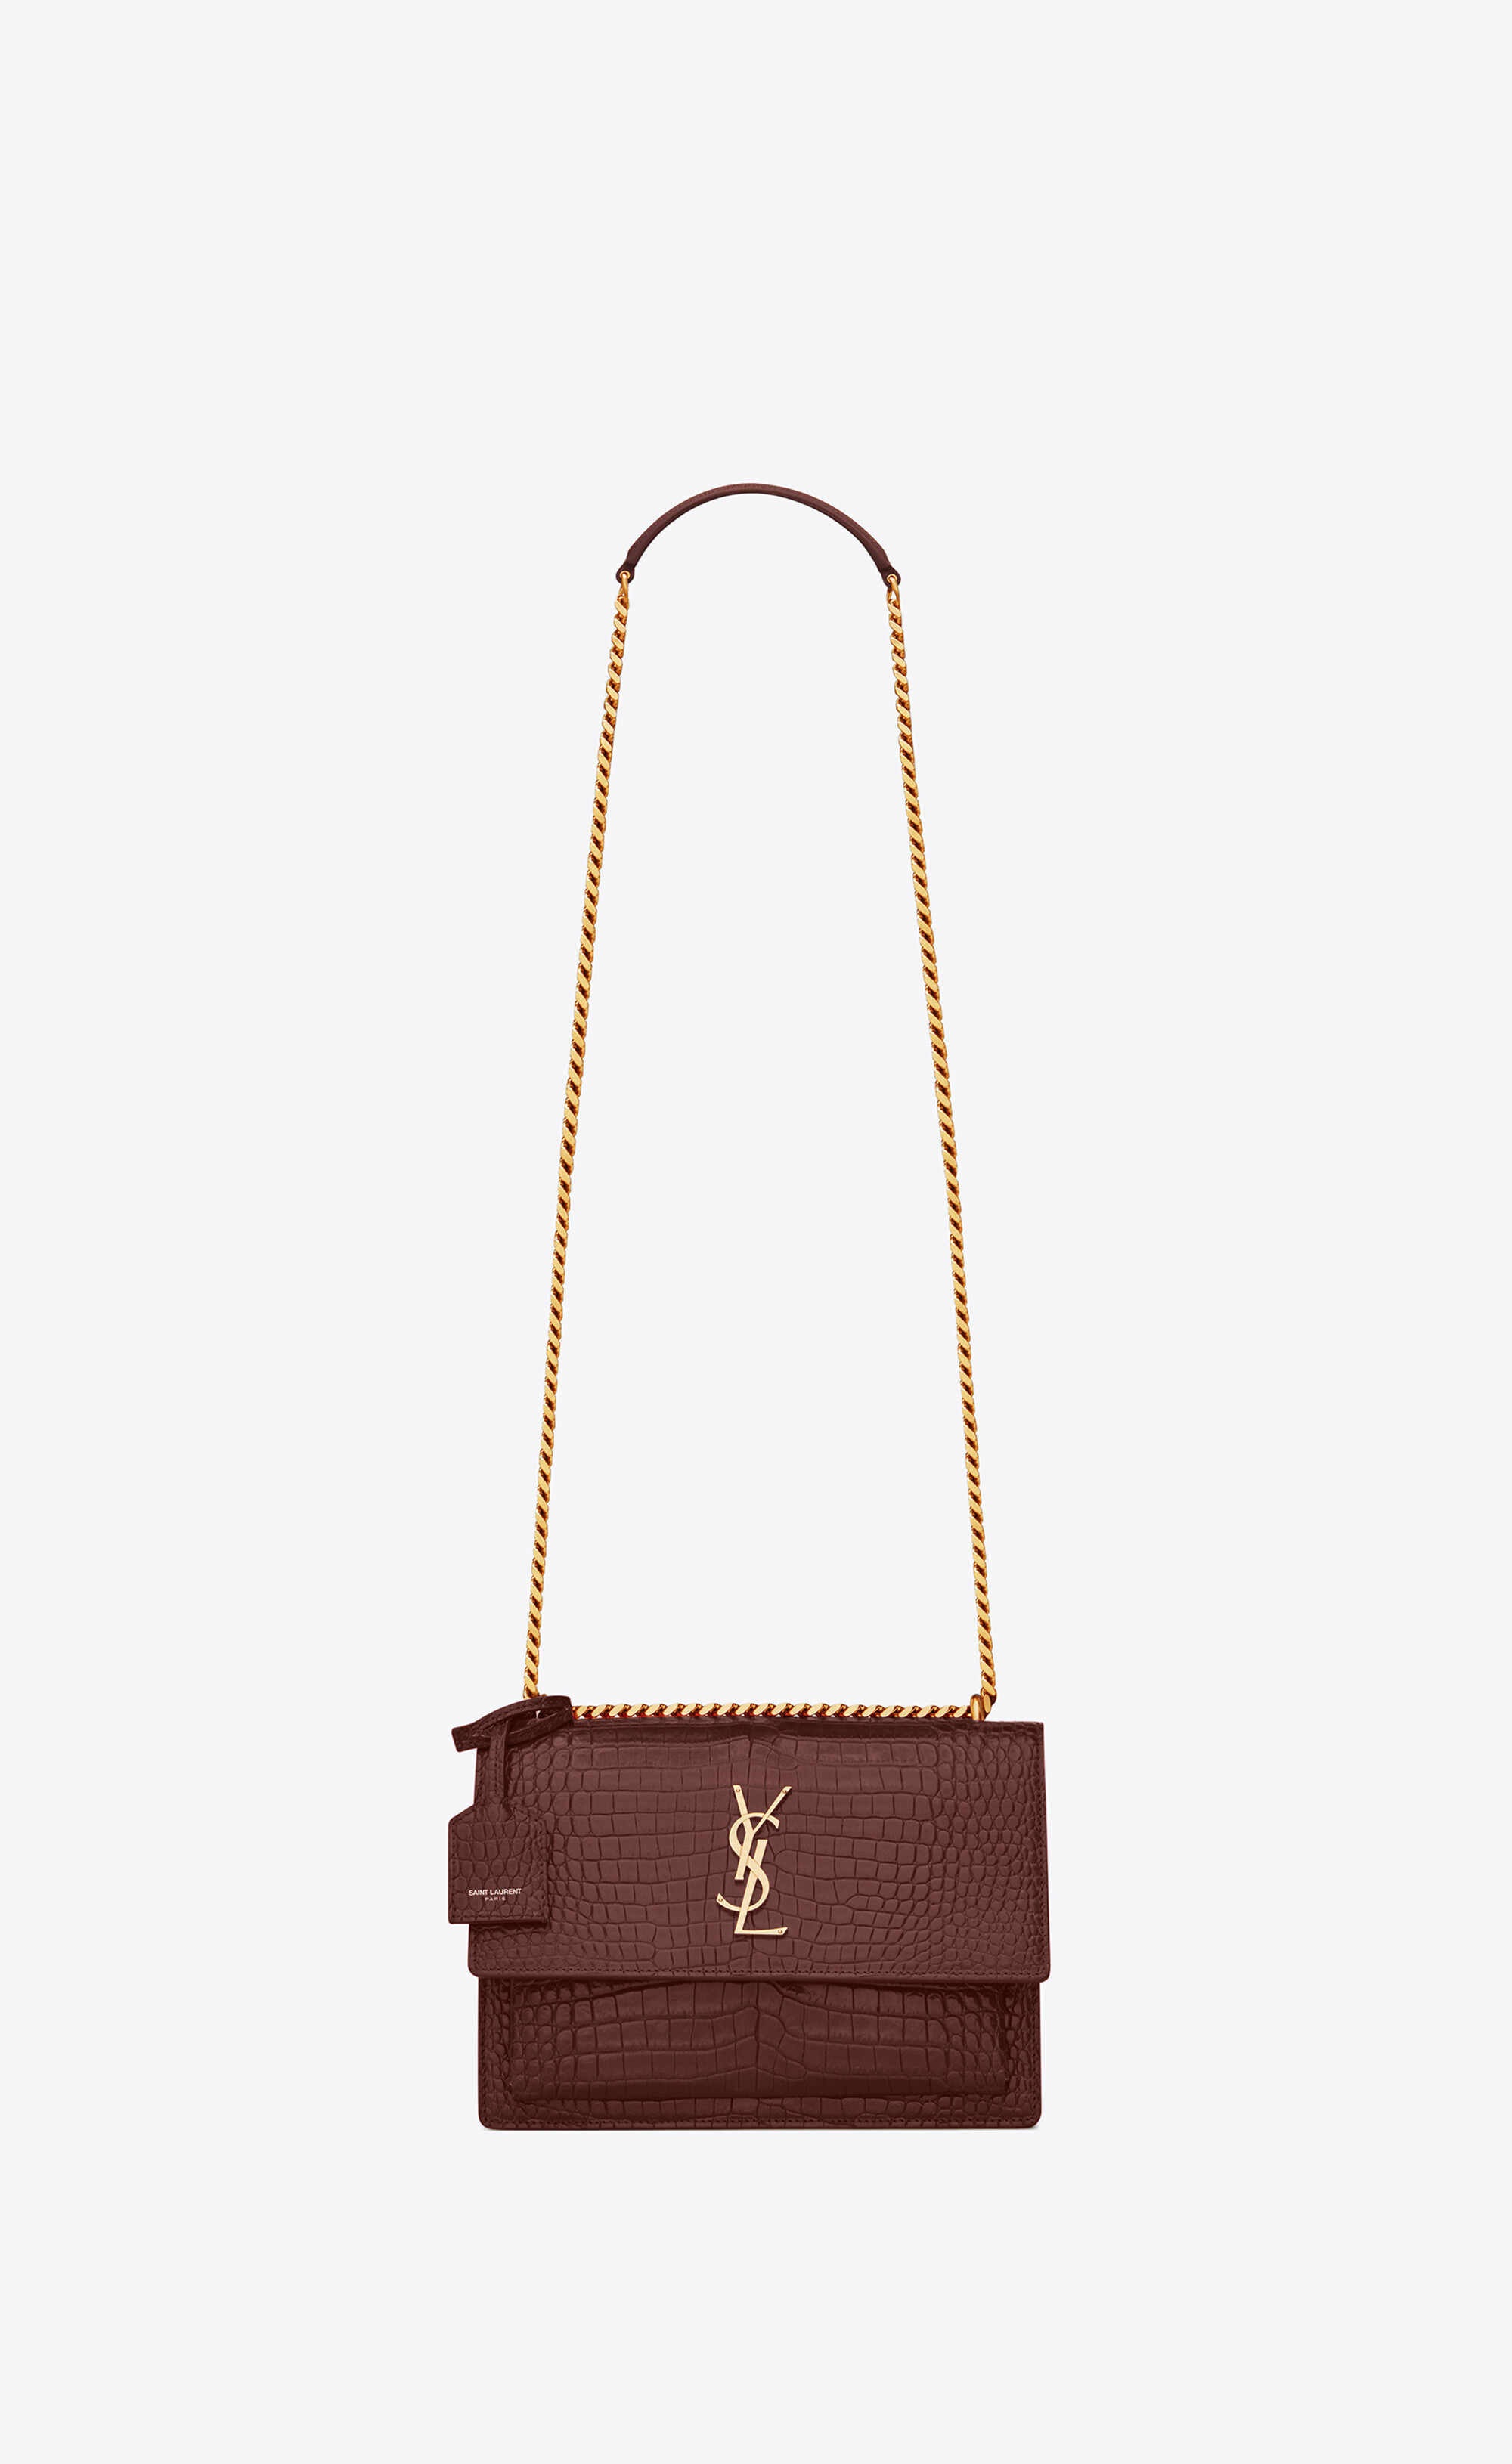 Saint Laurent Medium Sunset Chain Bag In Crocodile Embossed Leather  Red/Silver